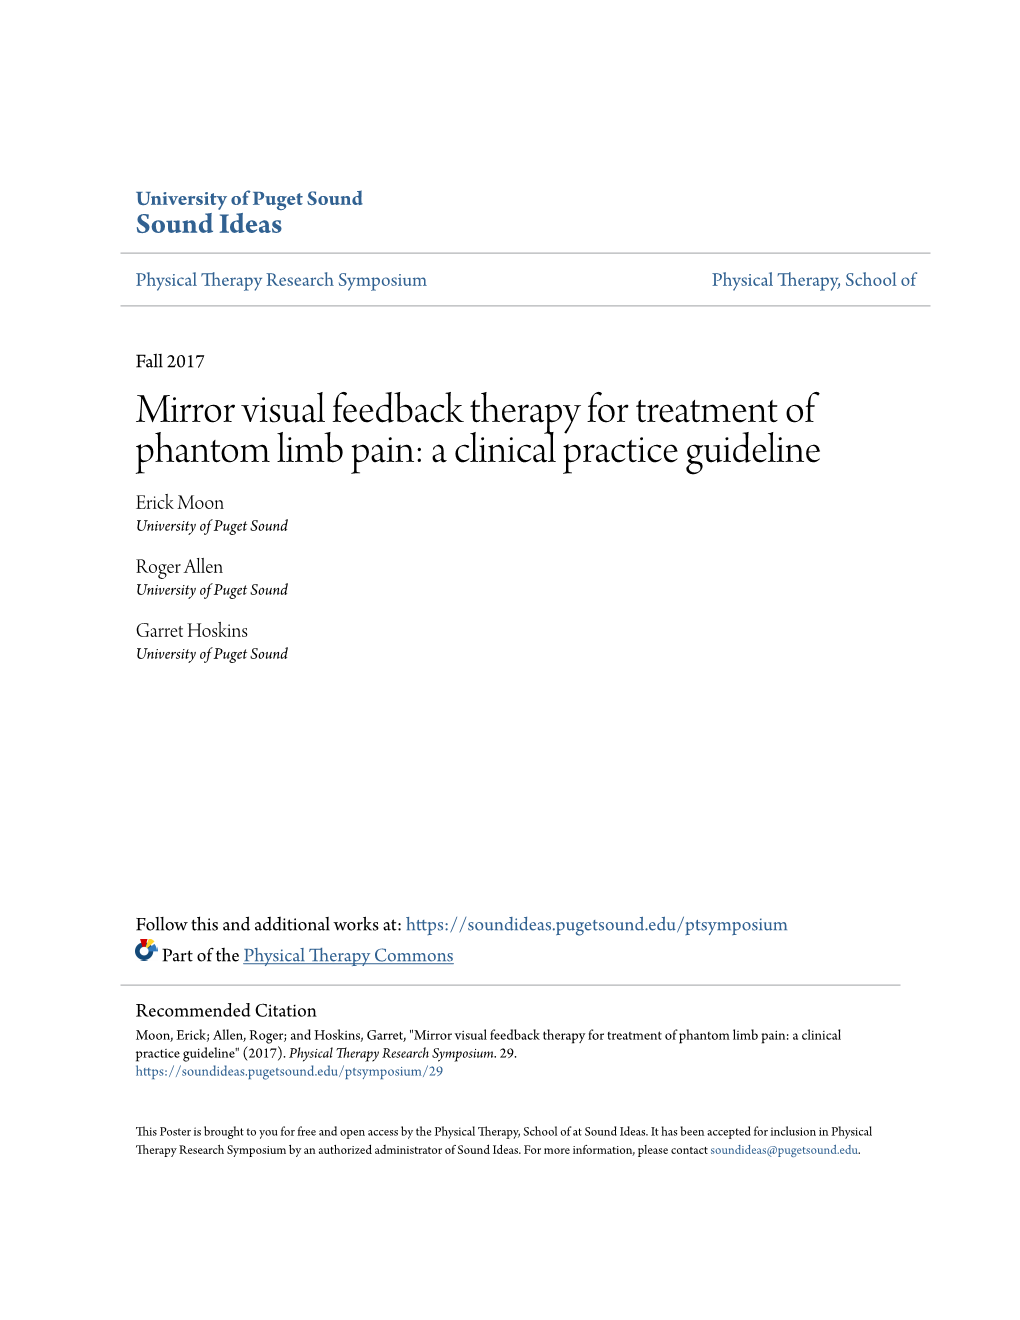 Mirror Visual Feedback Therapy for Treatment of Phantom Limb Pain: a Clinical Practice Guideline Erick Moon University of Puget Sound